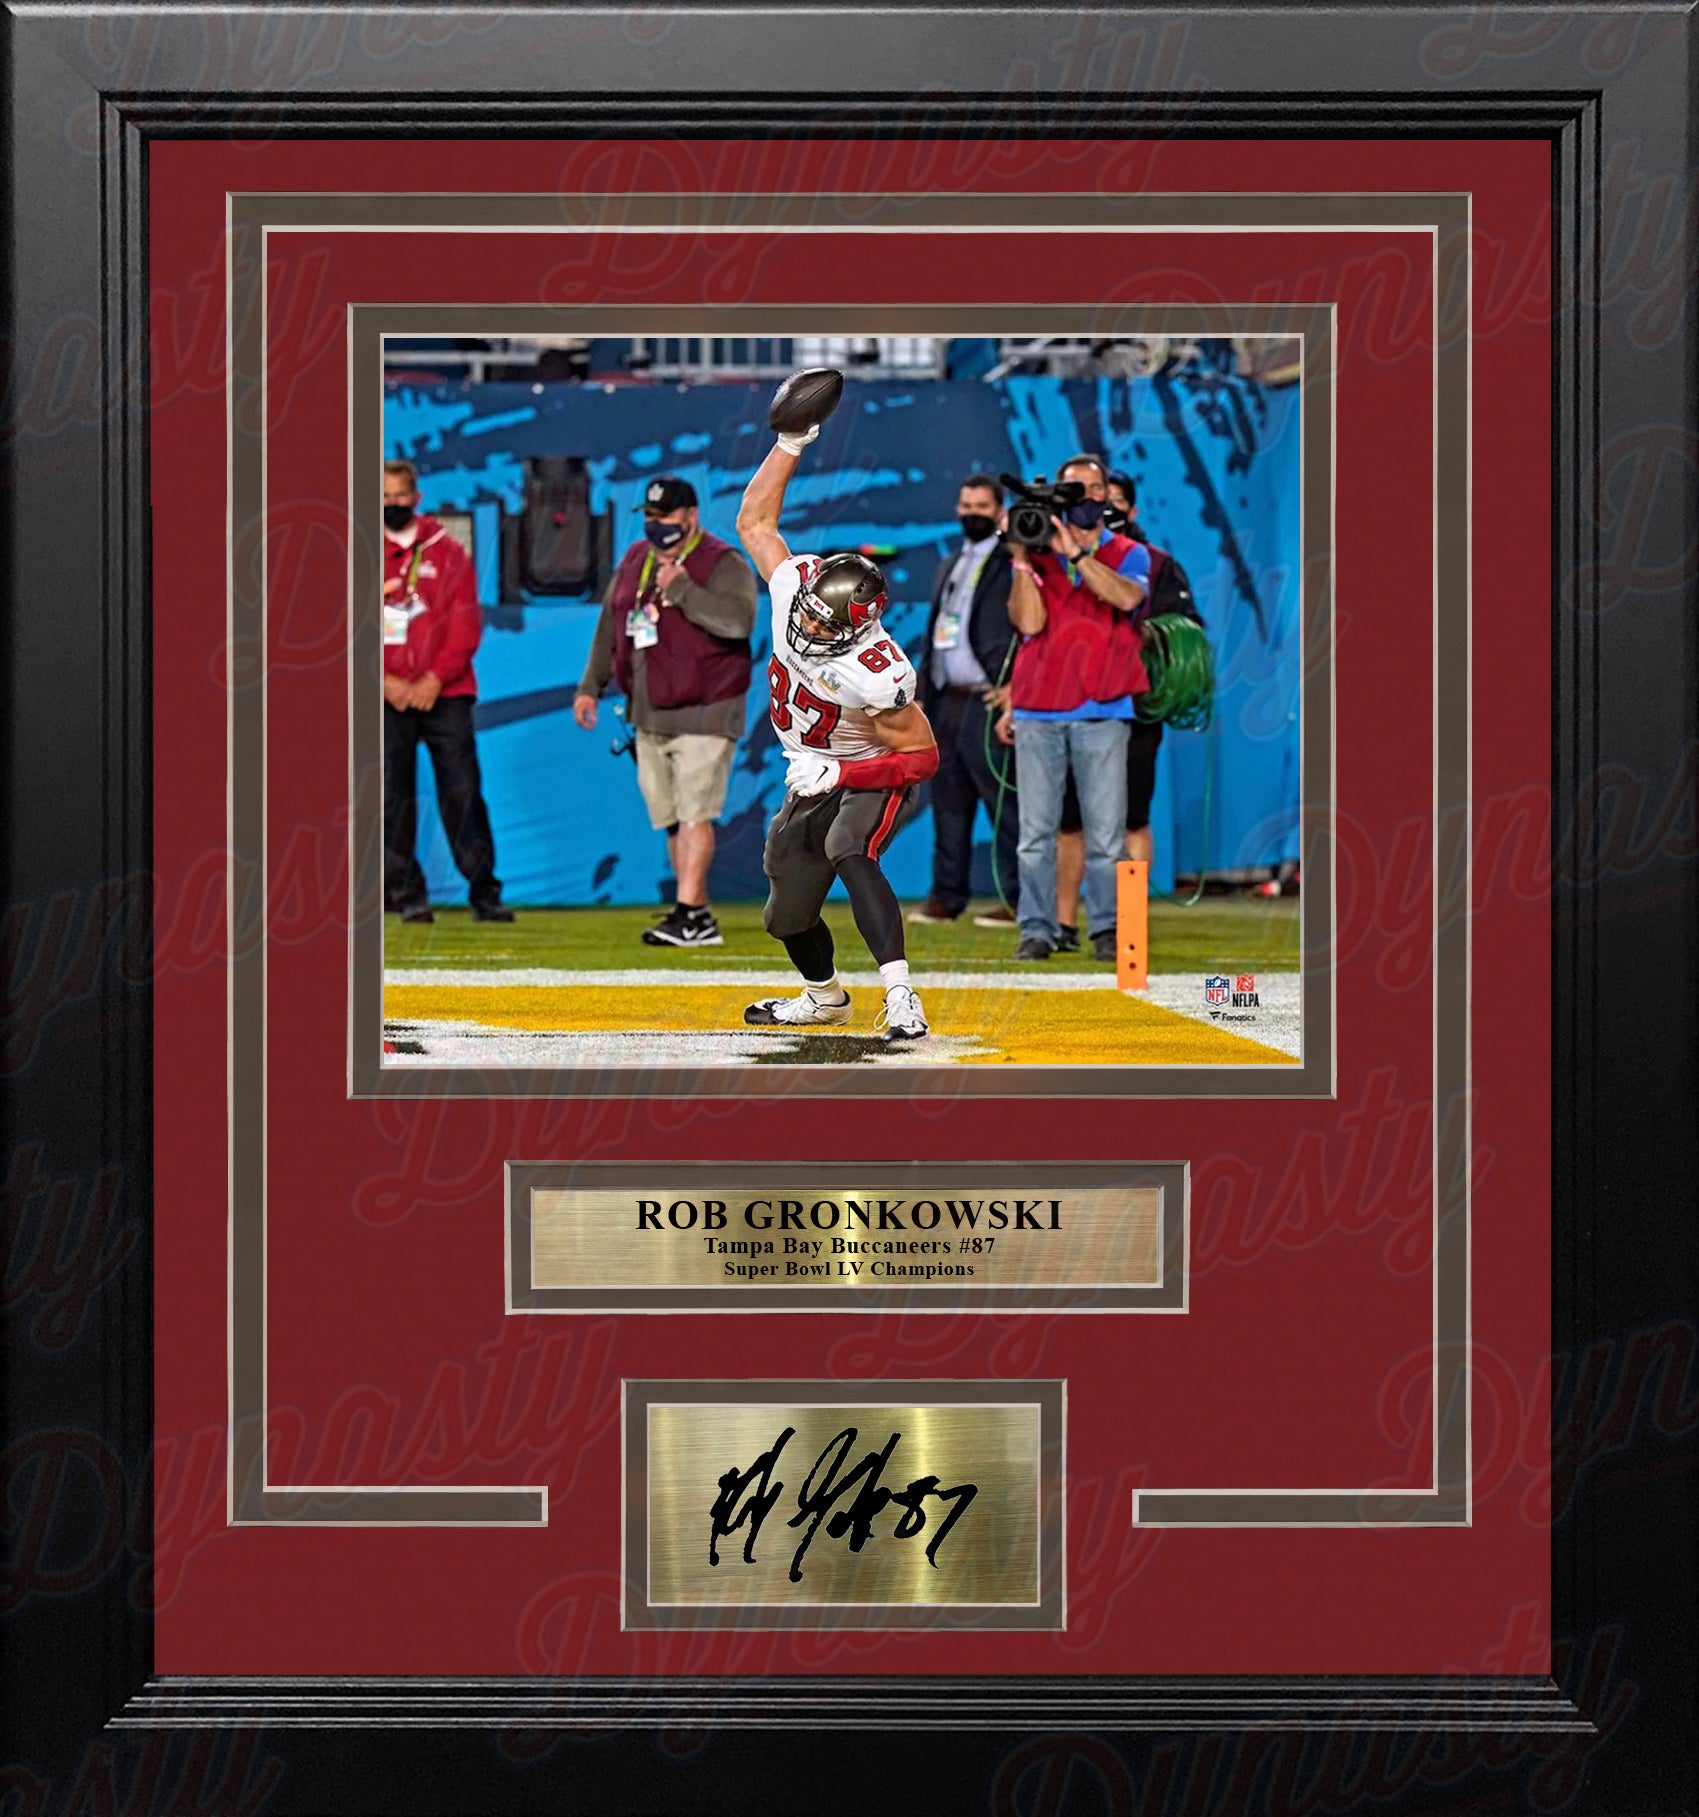 NFL Super Bowl LV Bucs Collectible Champion Framed Photo 